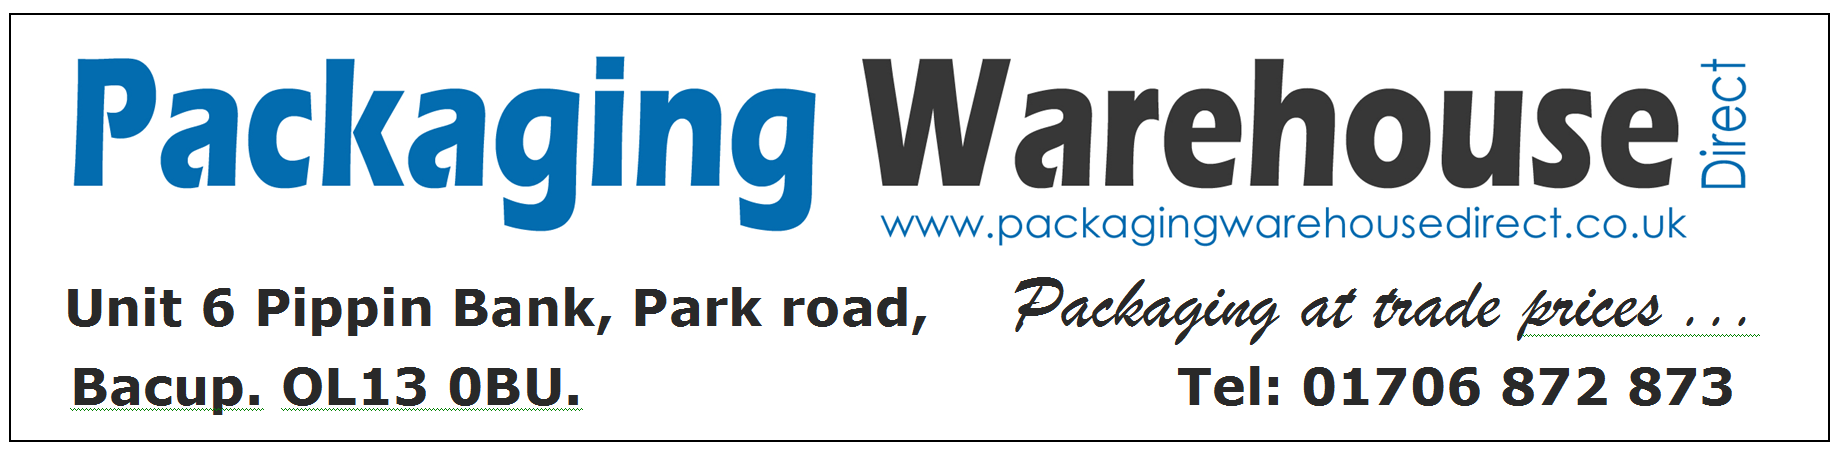 Packaging Warehouse Direct